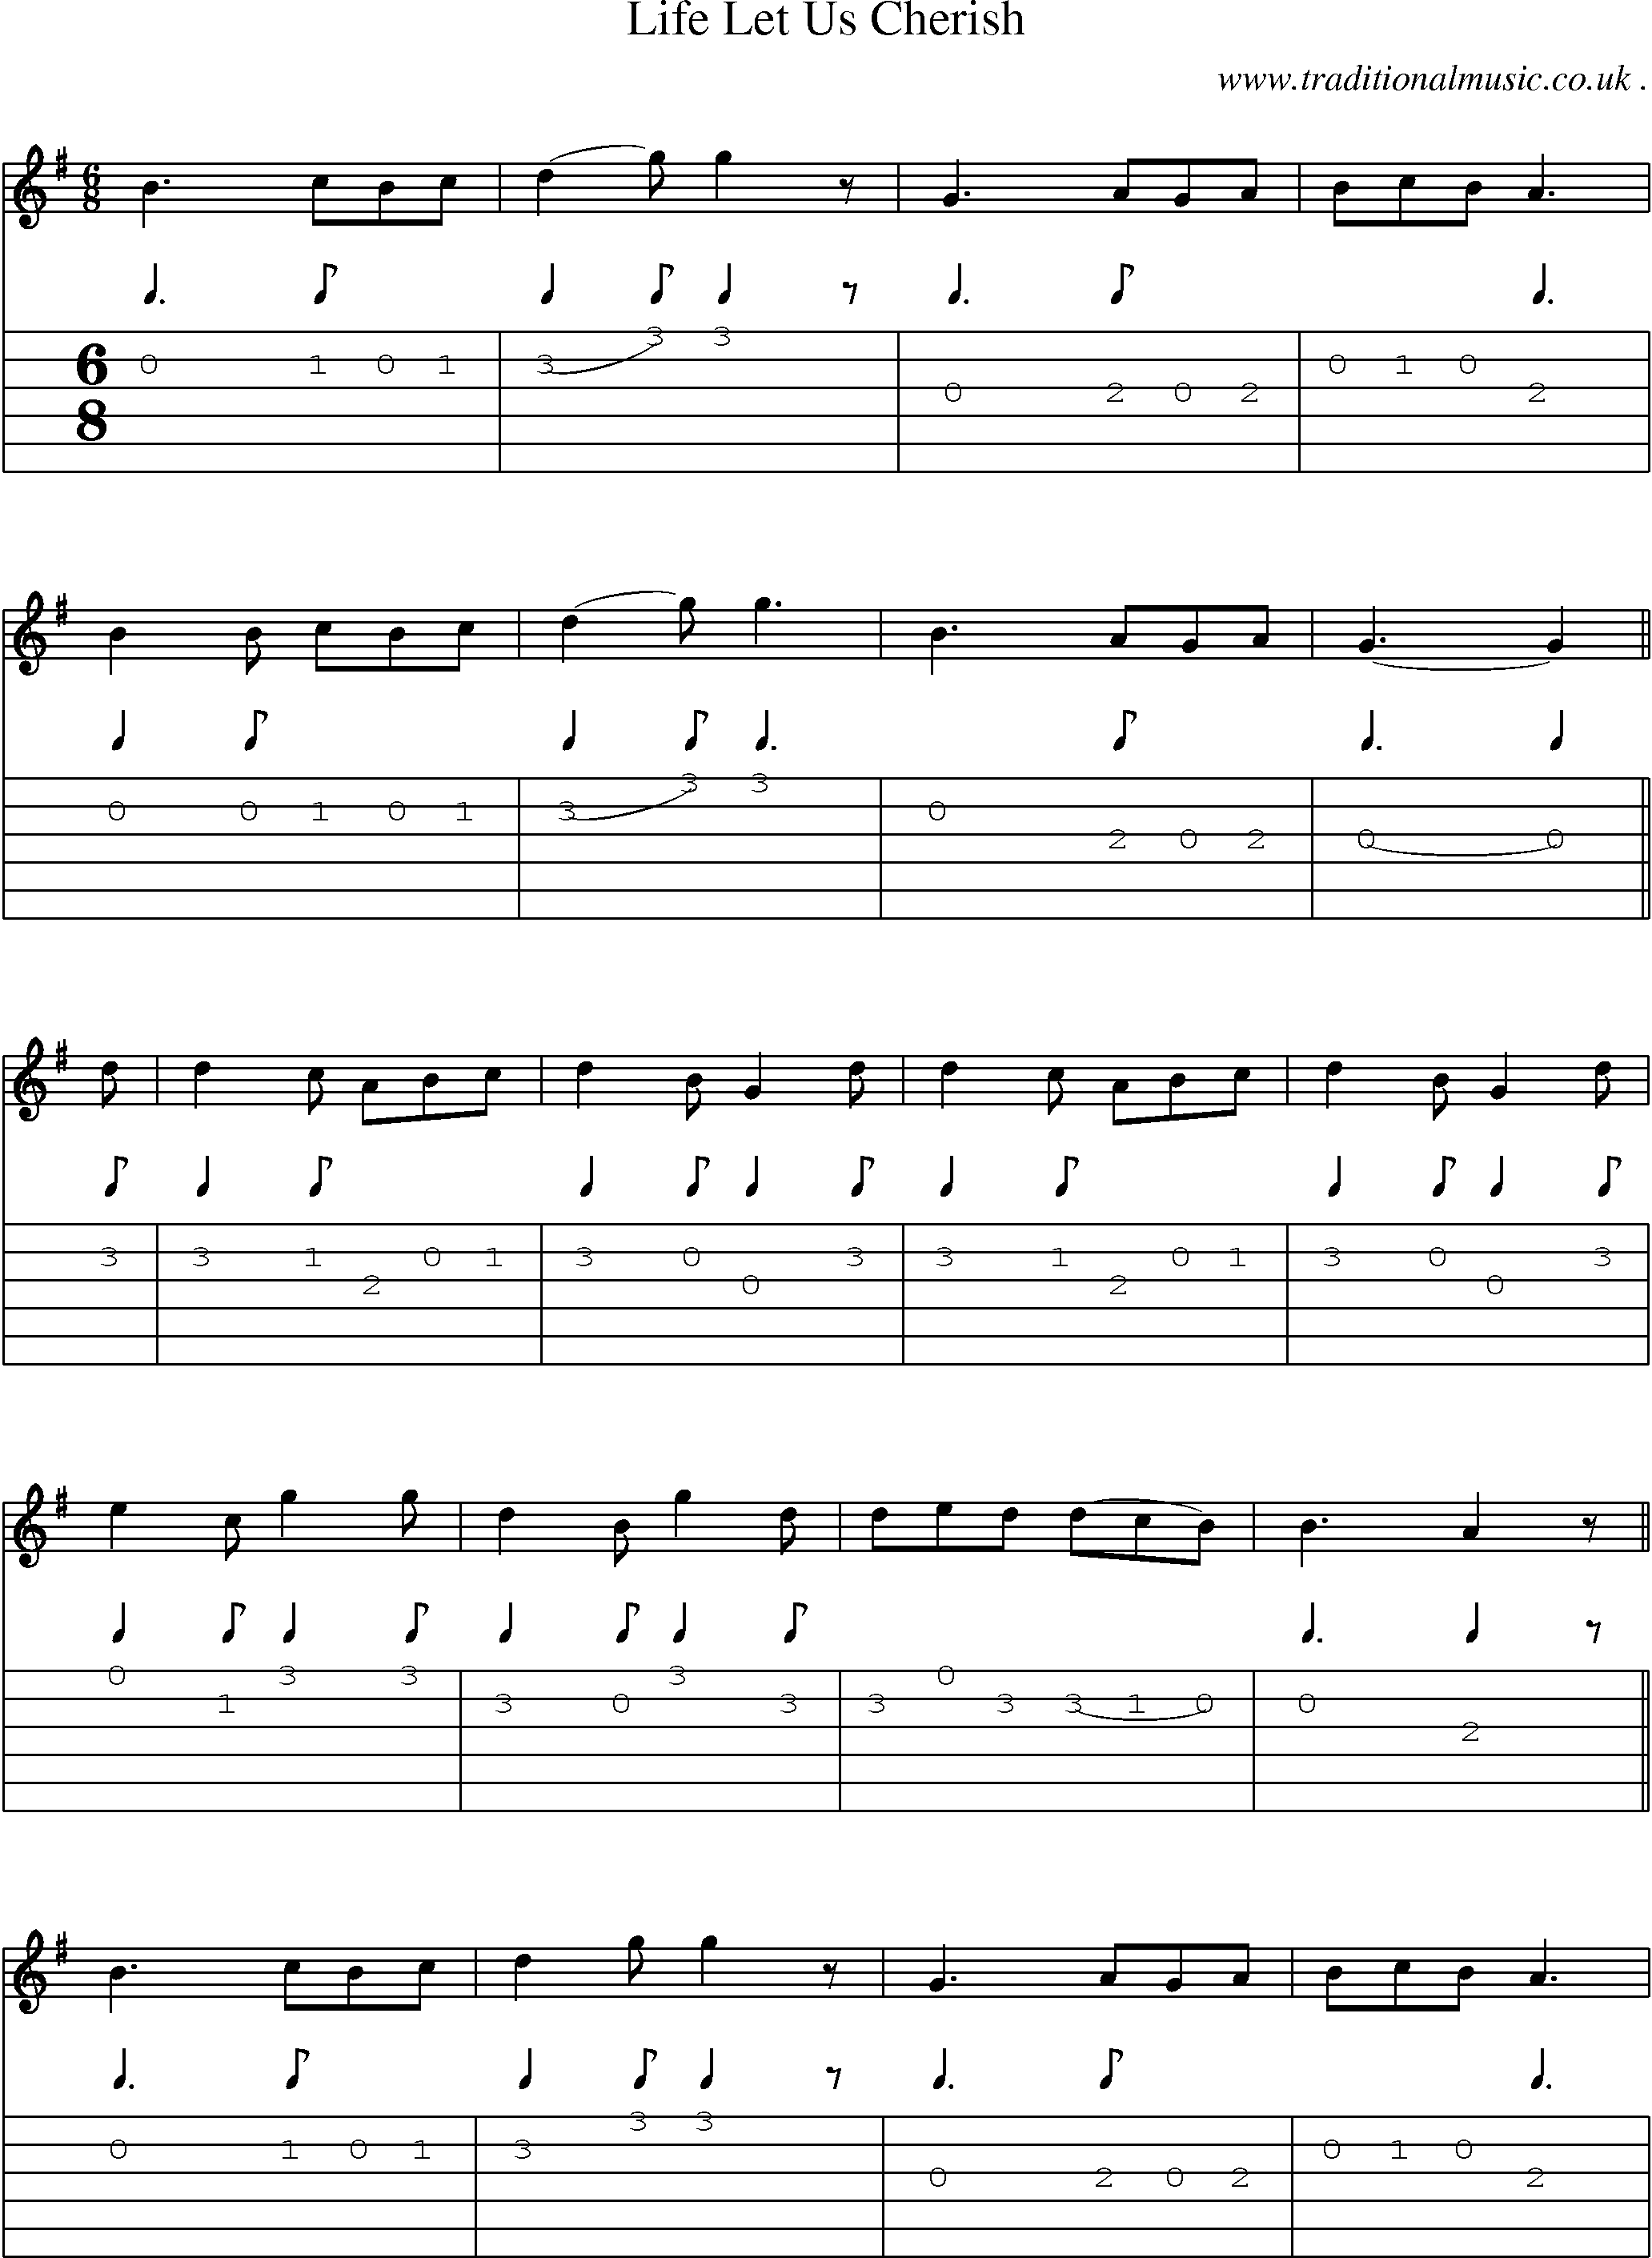 Sheet-Music and Guitar Tabs for Life Let Us Cherish 